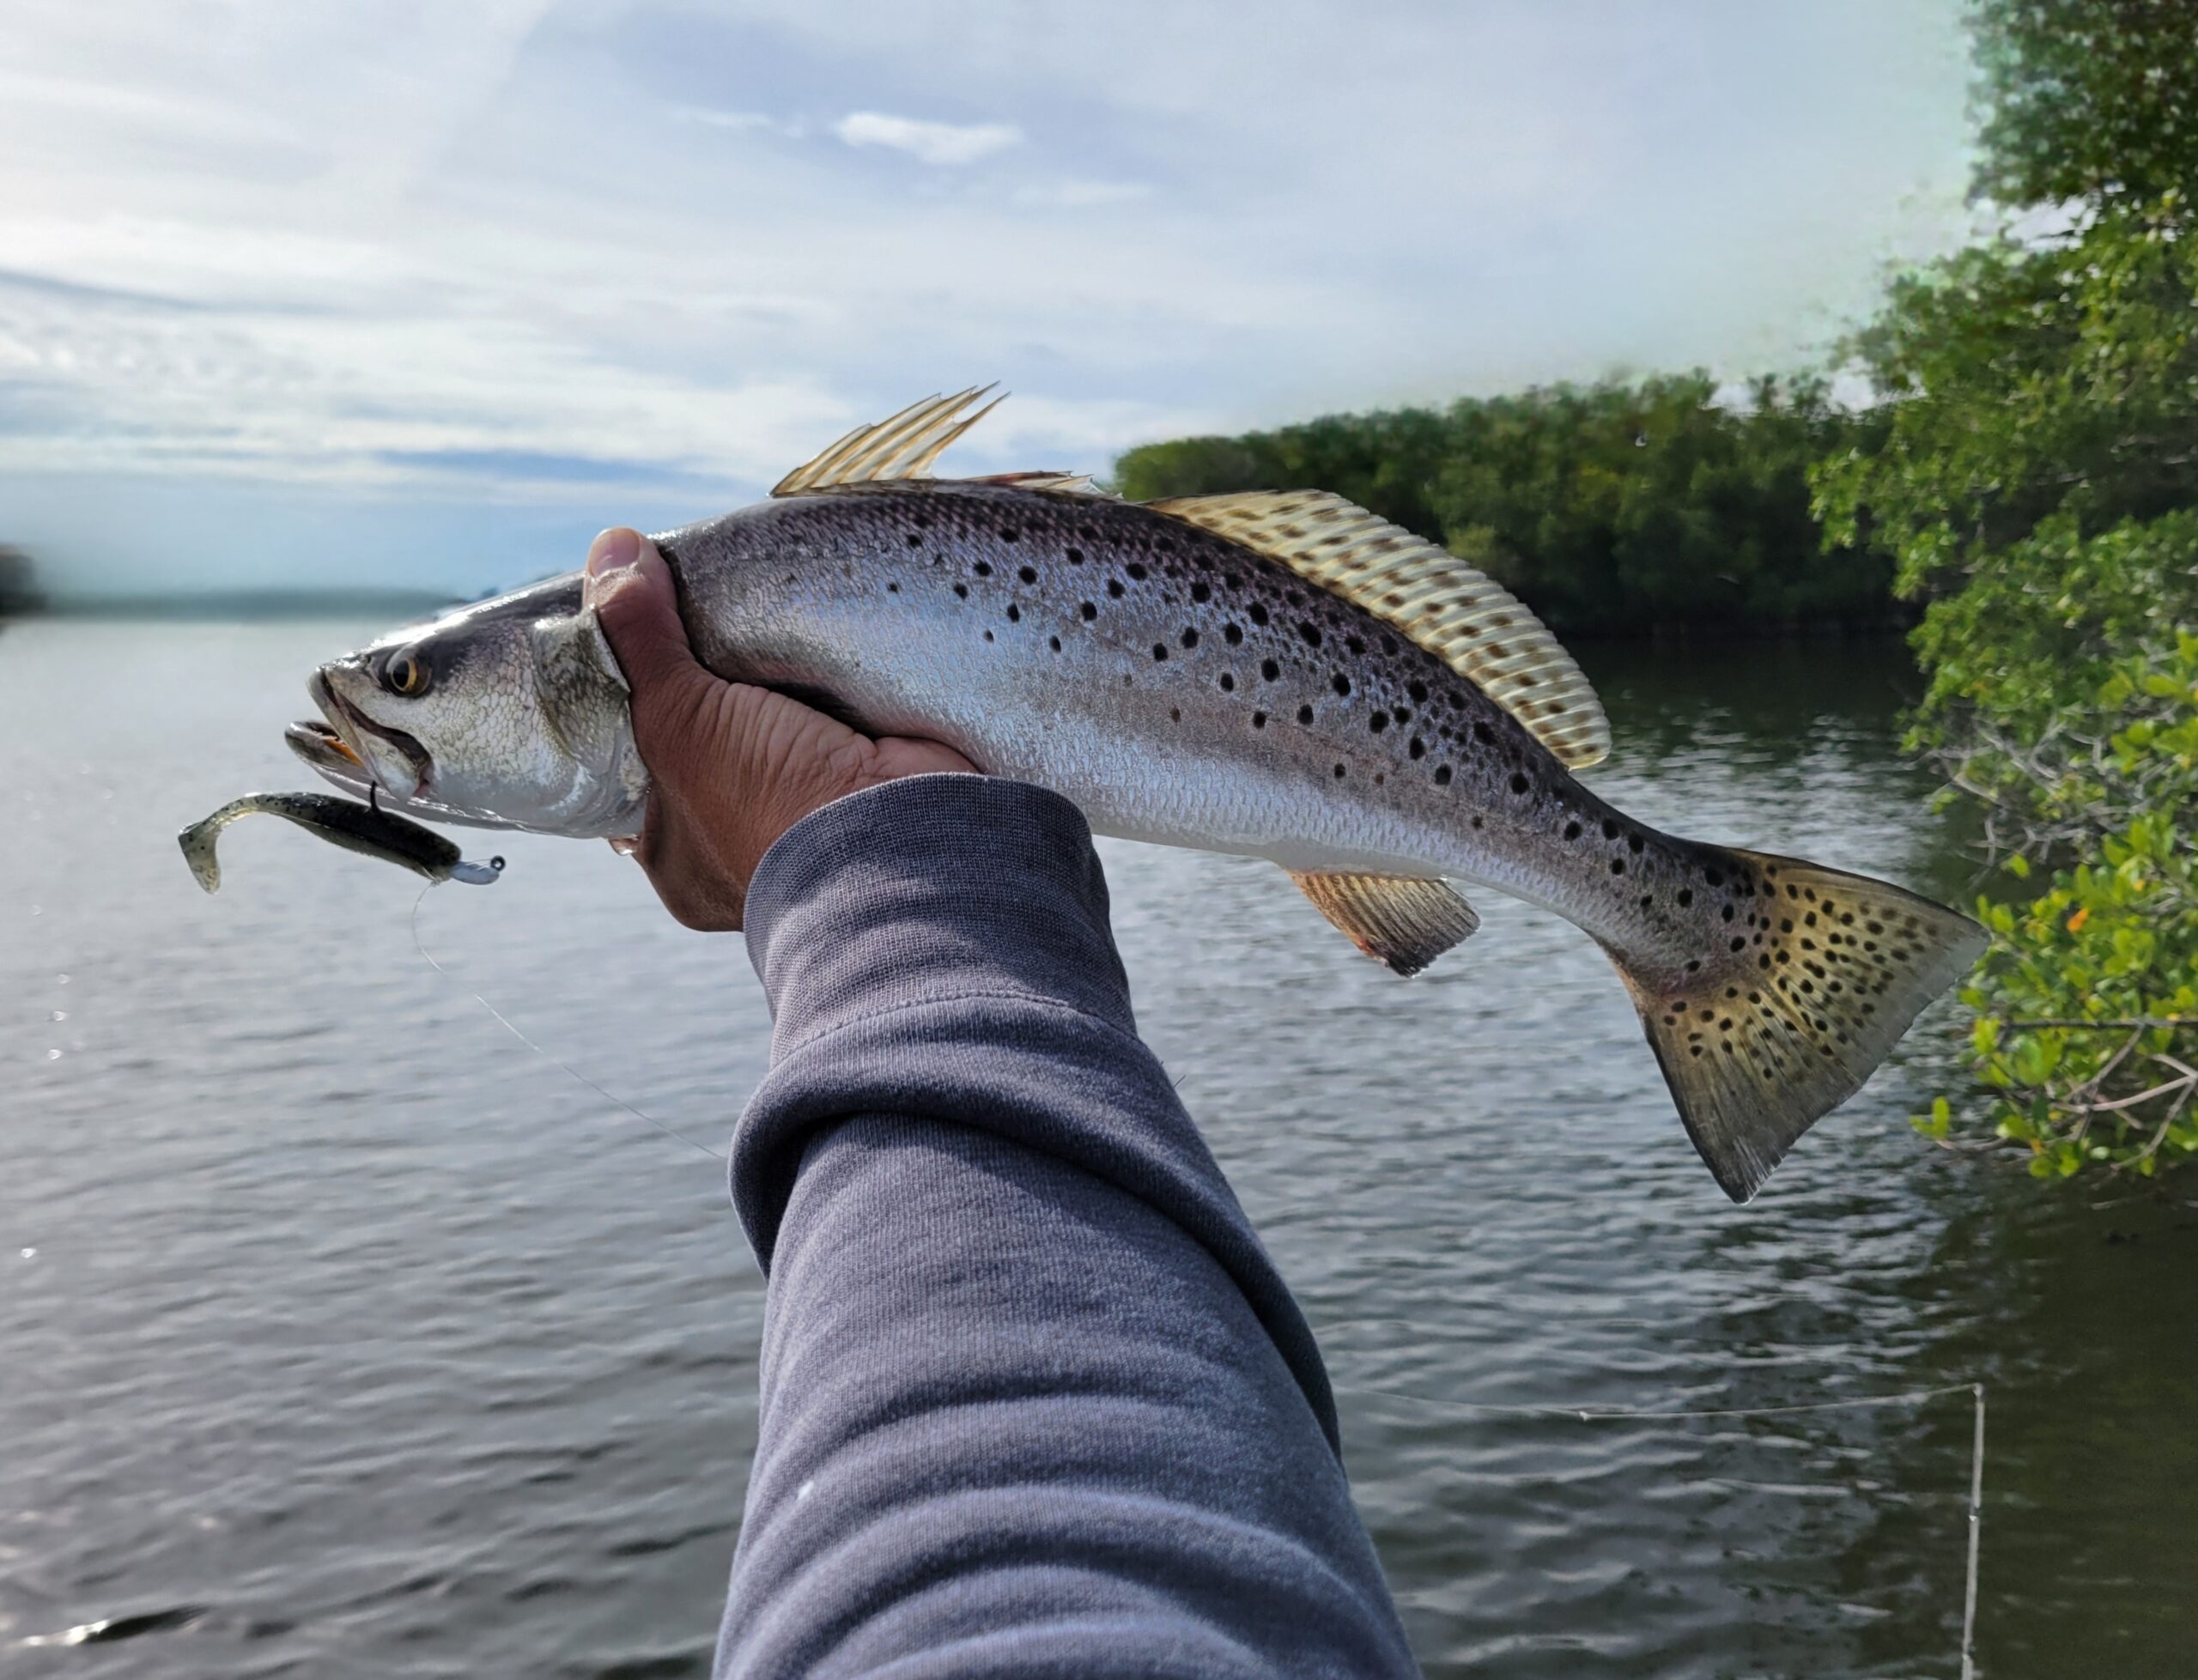 Seatrout everywhere! – SpaceFish